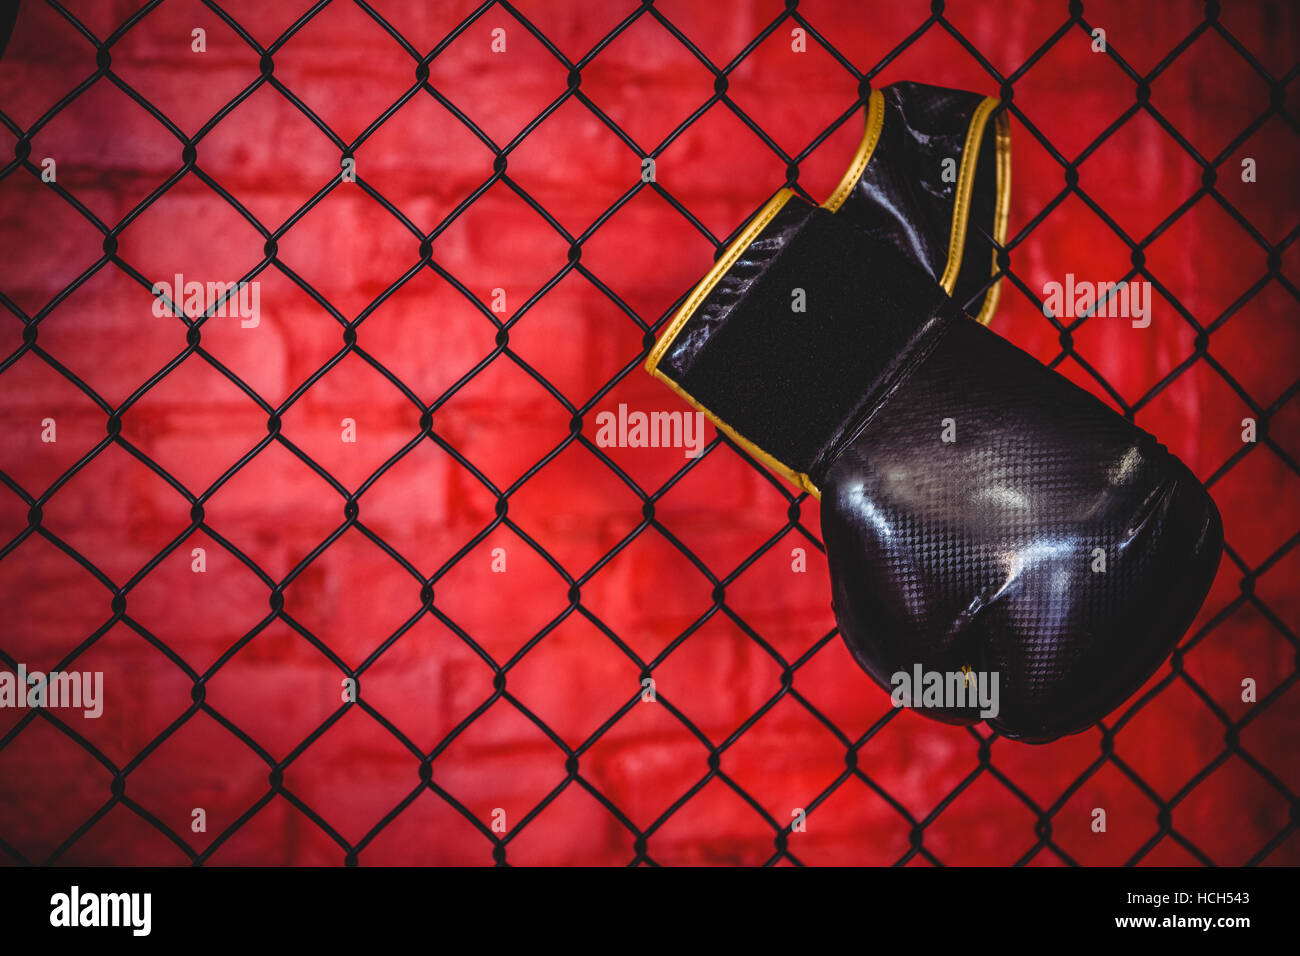 Boxing glove hanging on wire mesh fence Stock Photo